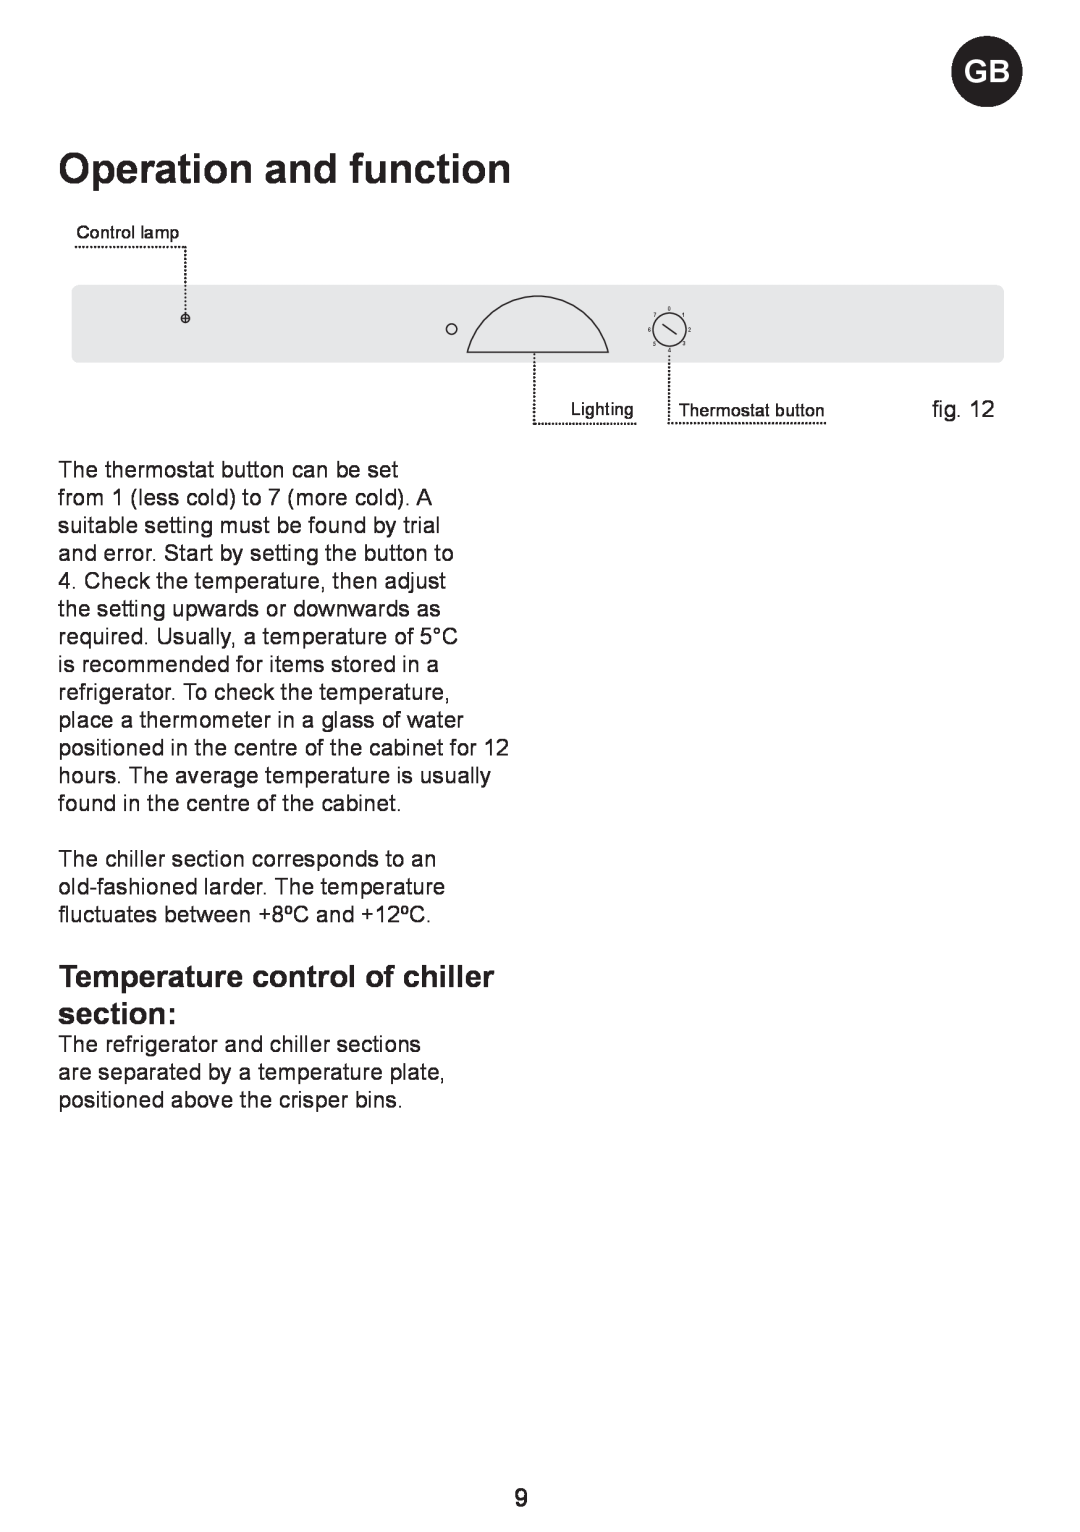 Smeg SW Range manual Operation and function, Temperature control of chiller section 